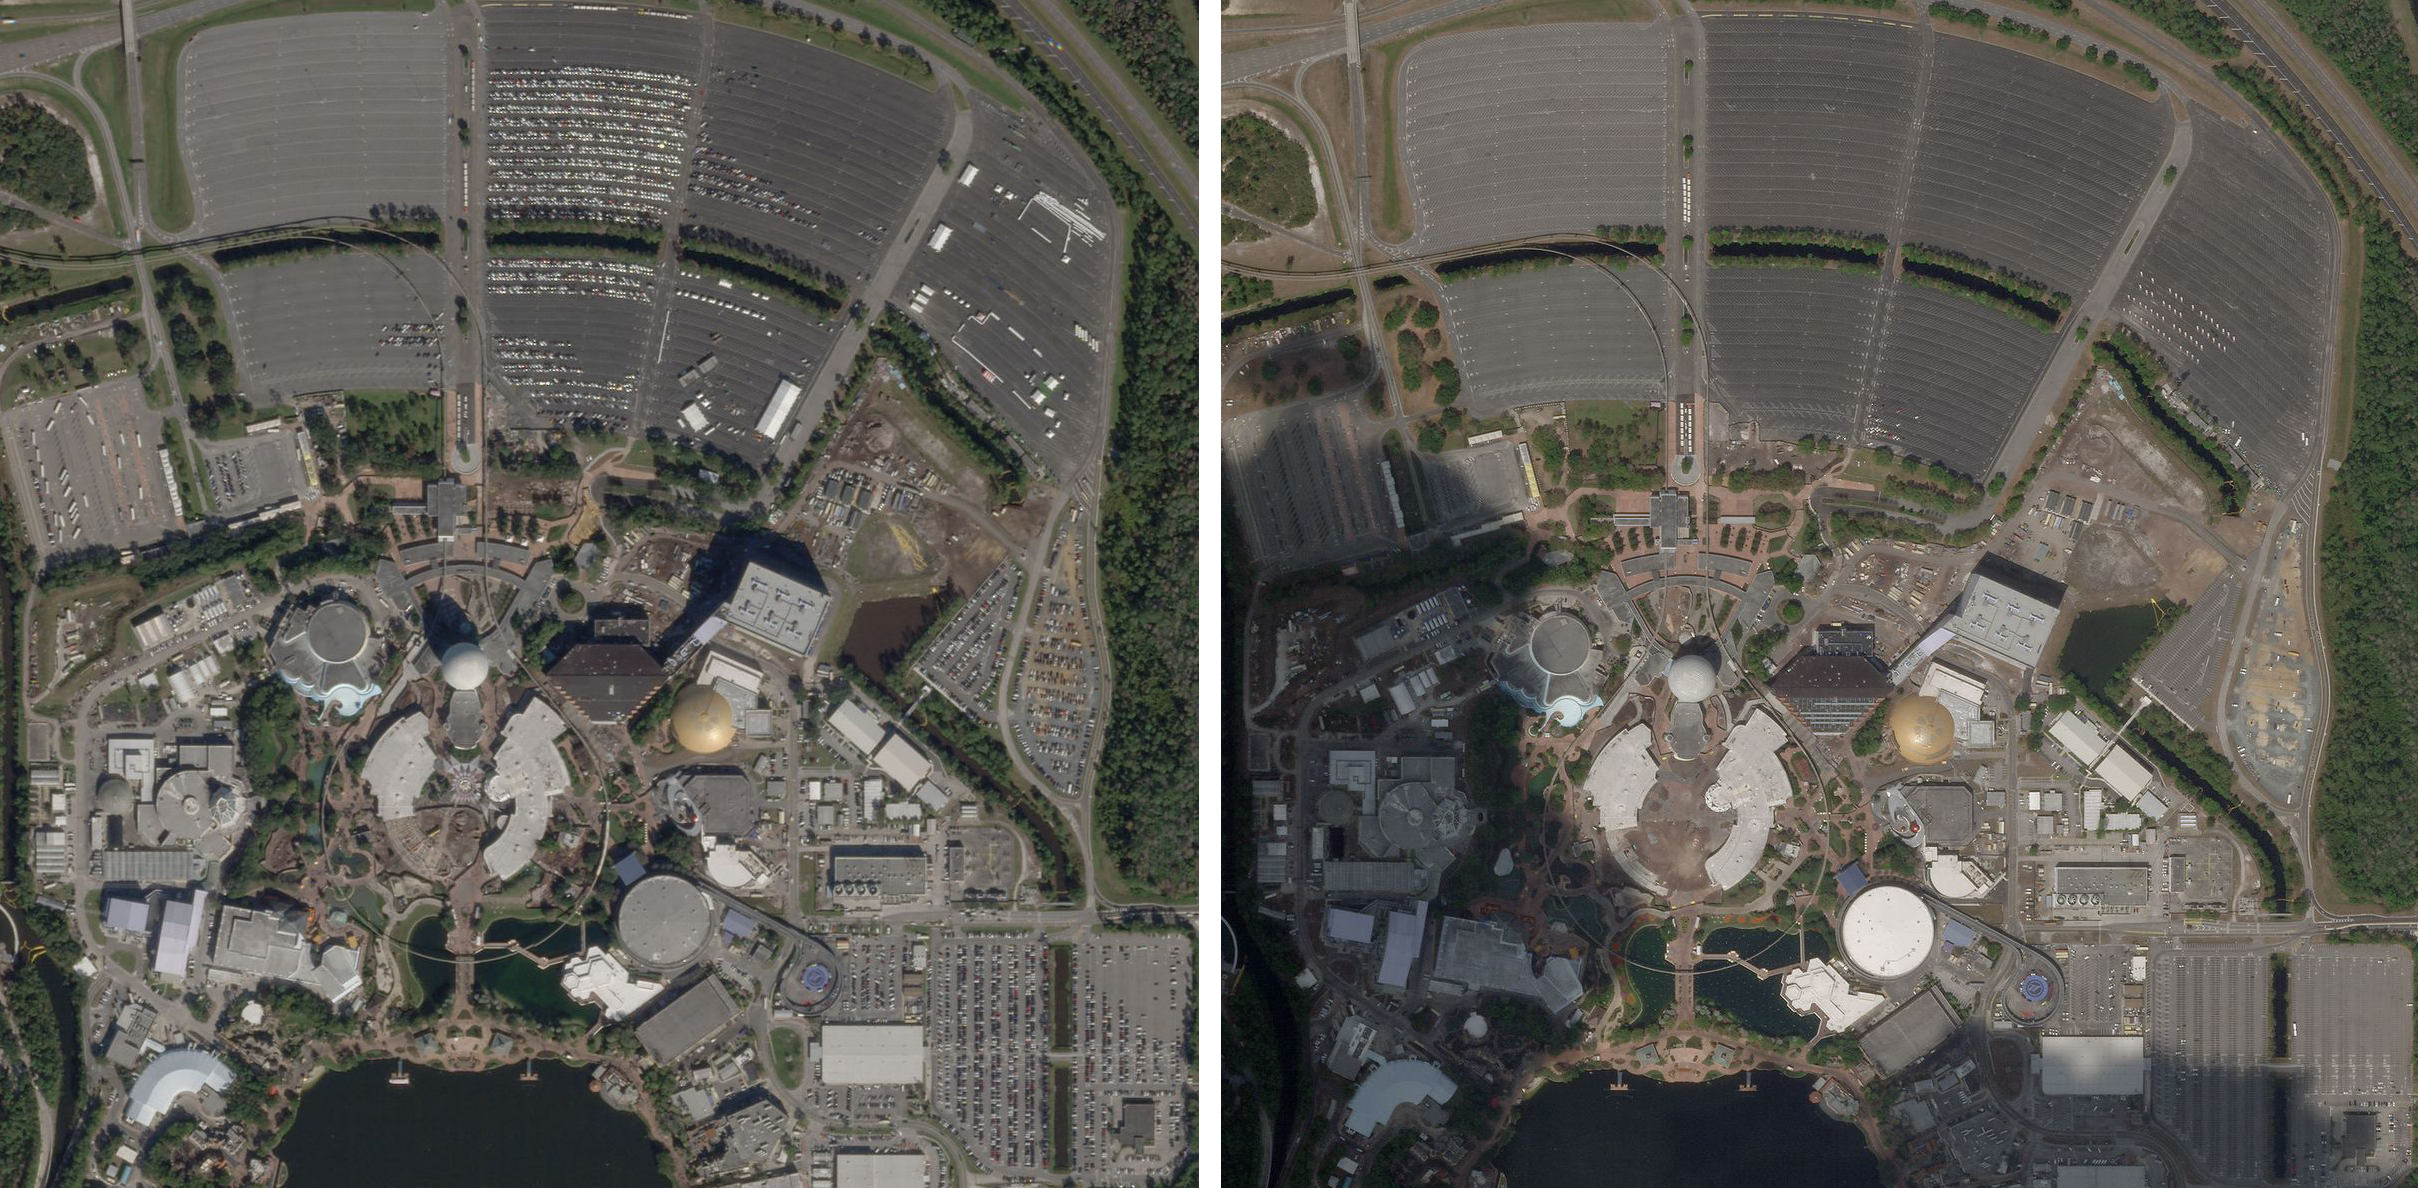 Epcot Center in Bay Lake Florida on January 6, 2020 (left) is full of park goers cars. Since COVID-19 safety measures were instated by Walt Disney Co. on March 18, 2020, the lots have continued to be empty (right). © 2020, Planet Labs Inc. All Rights Reserved.